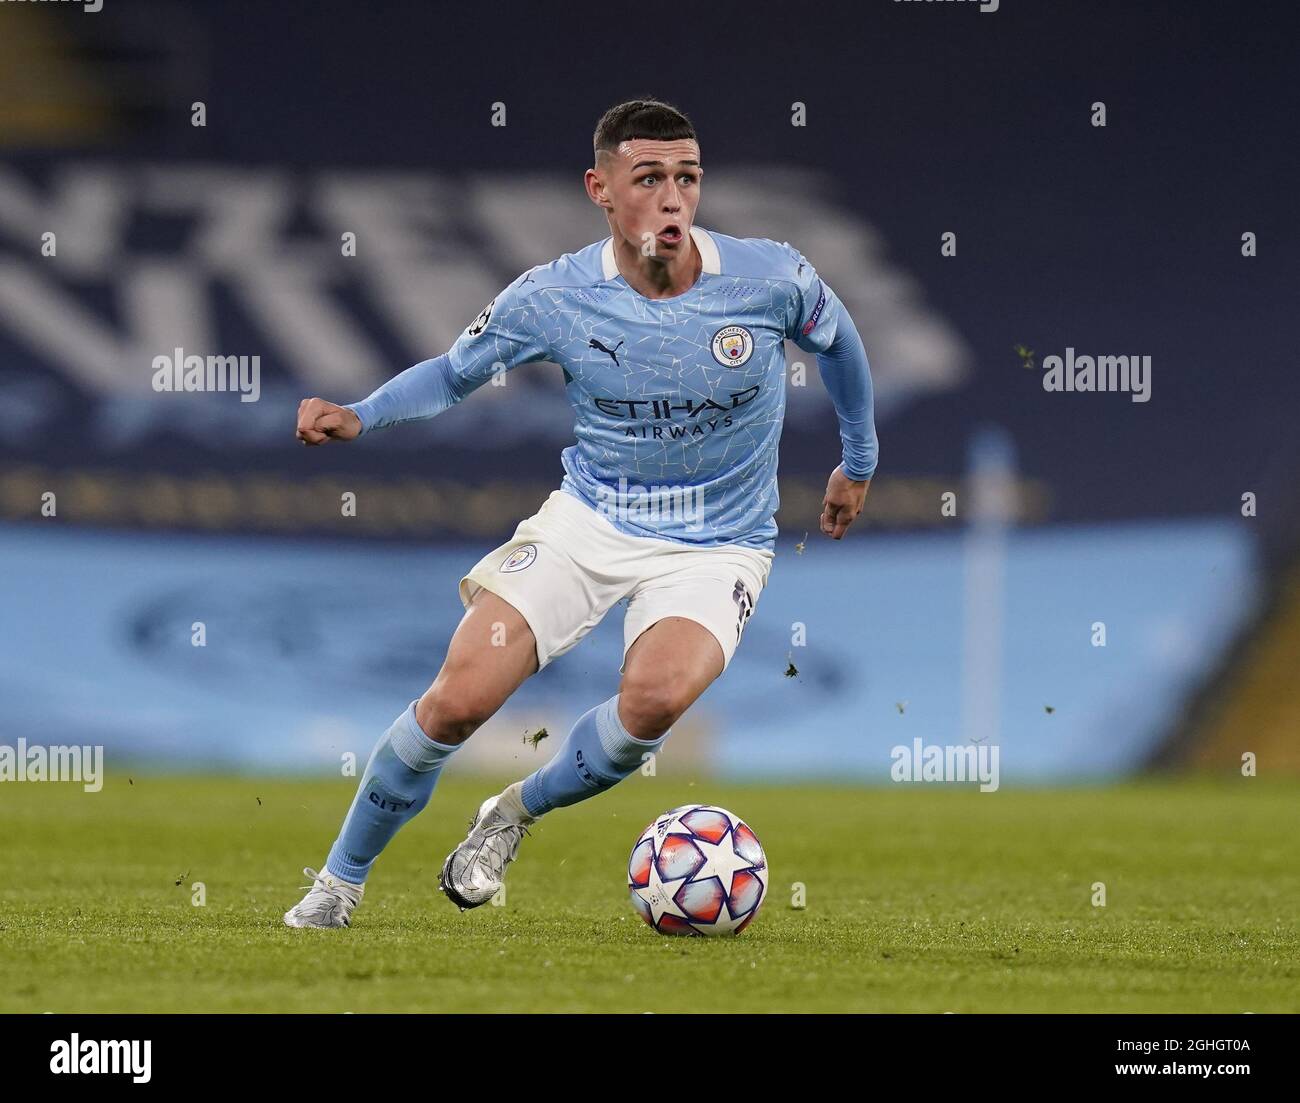 Phil Foden of Manchester City in action during the UEFA Champions League match at the Etihad Stadium, Manchester. Picture date: 3rd November 2020. Picture credit should read: Andrew Yates/Sportimage via PA Images Stock Photo